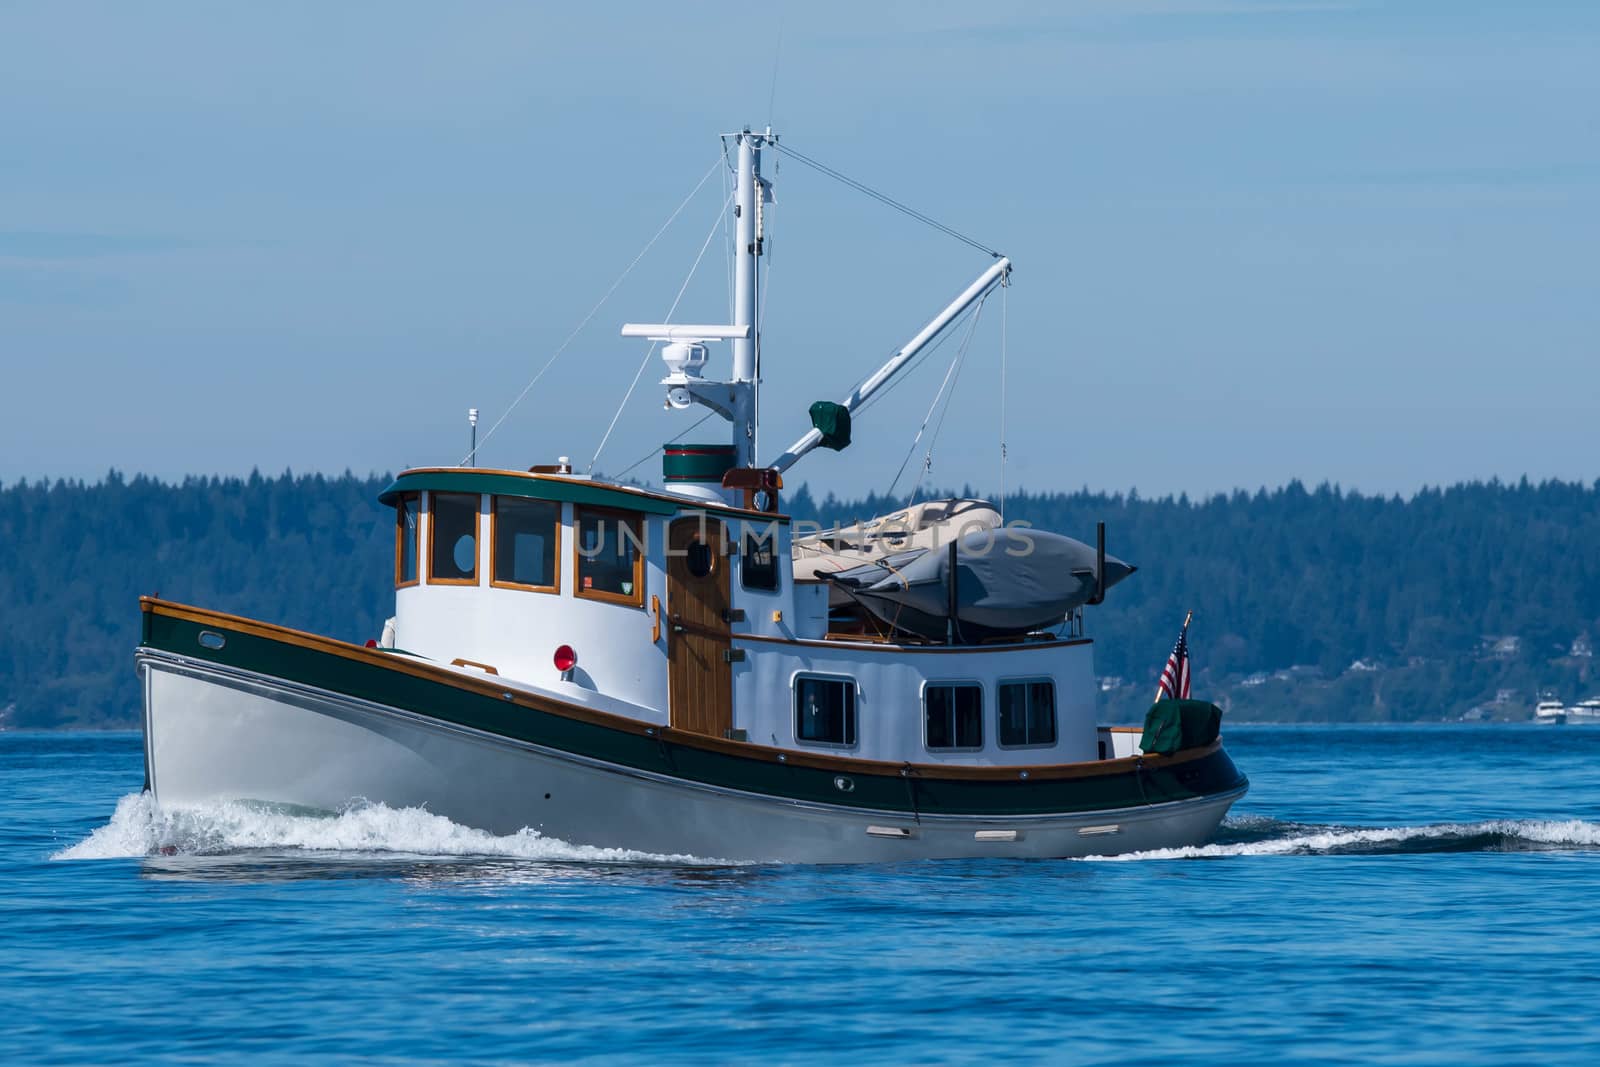 Popular type yacht, tug on her way to Seattle